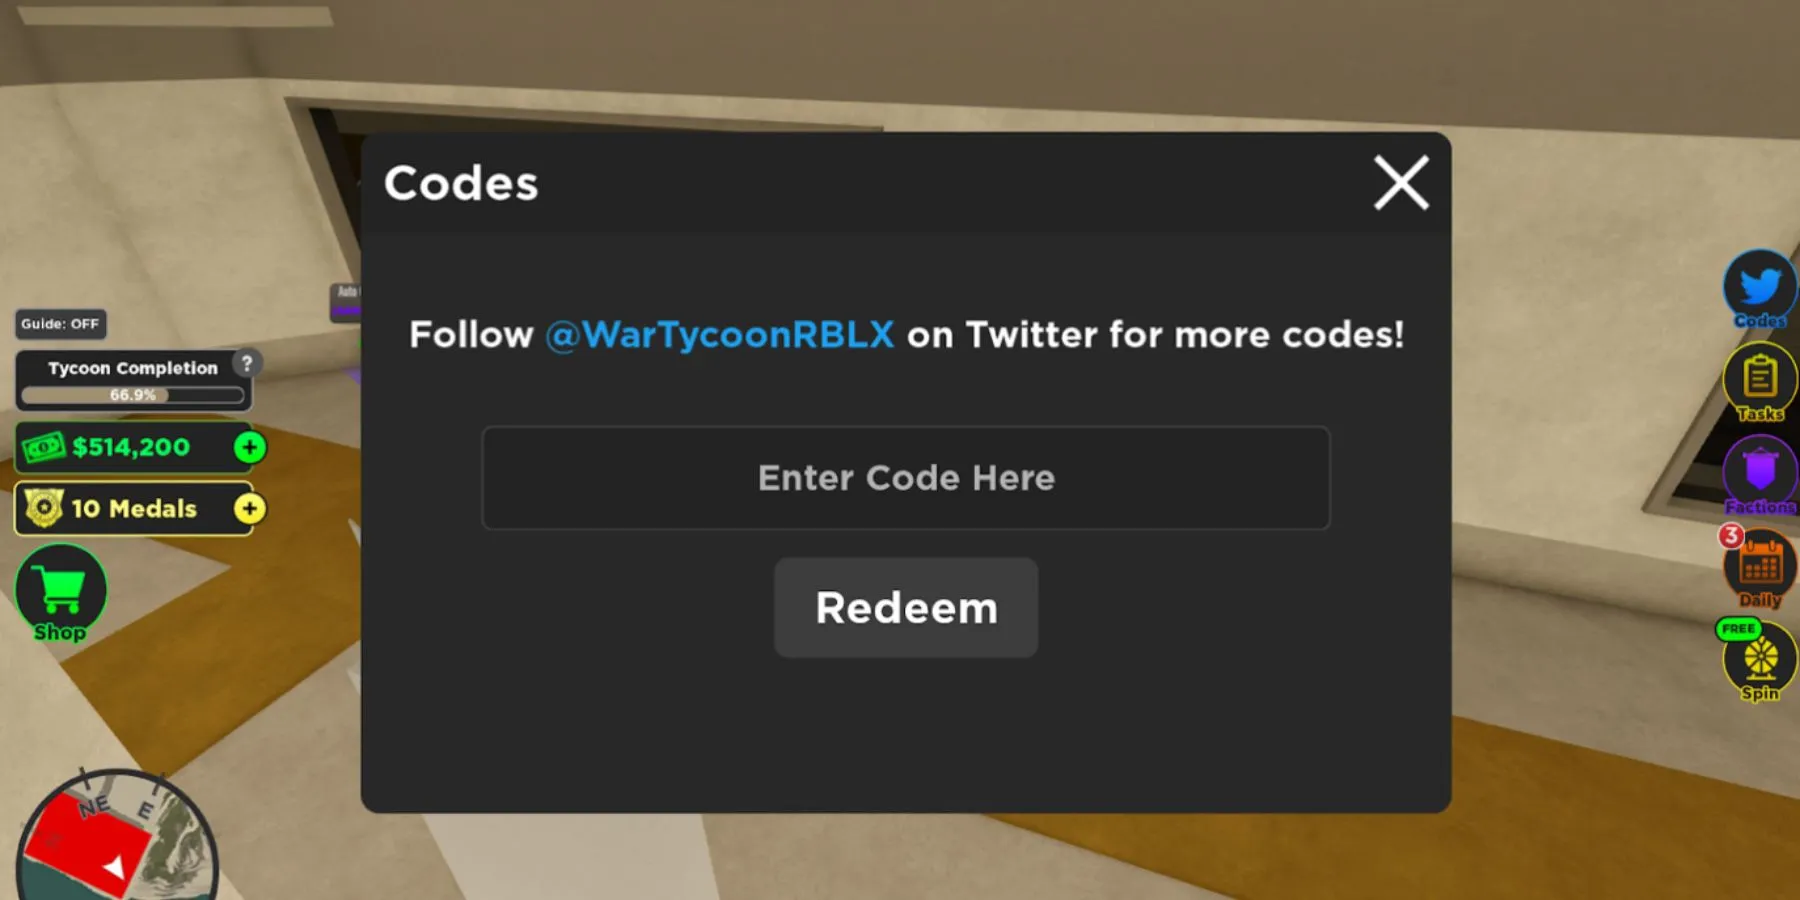 War Tycoon: The Codes Button